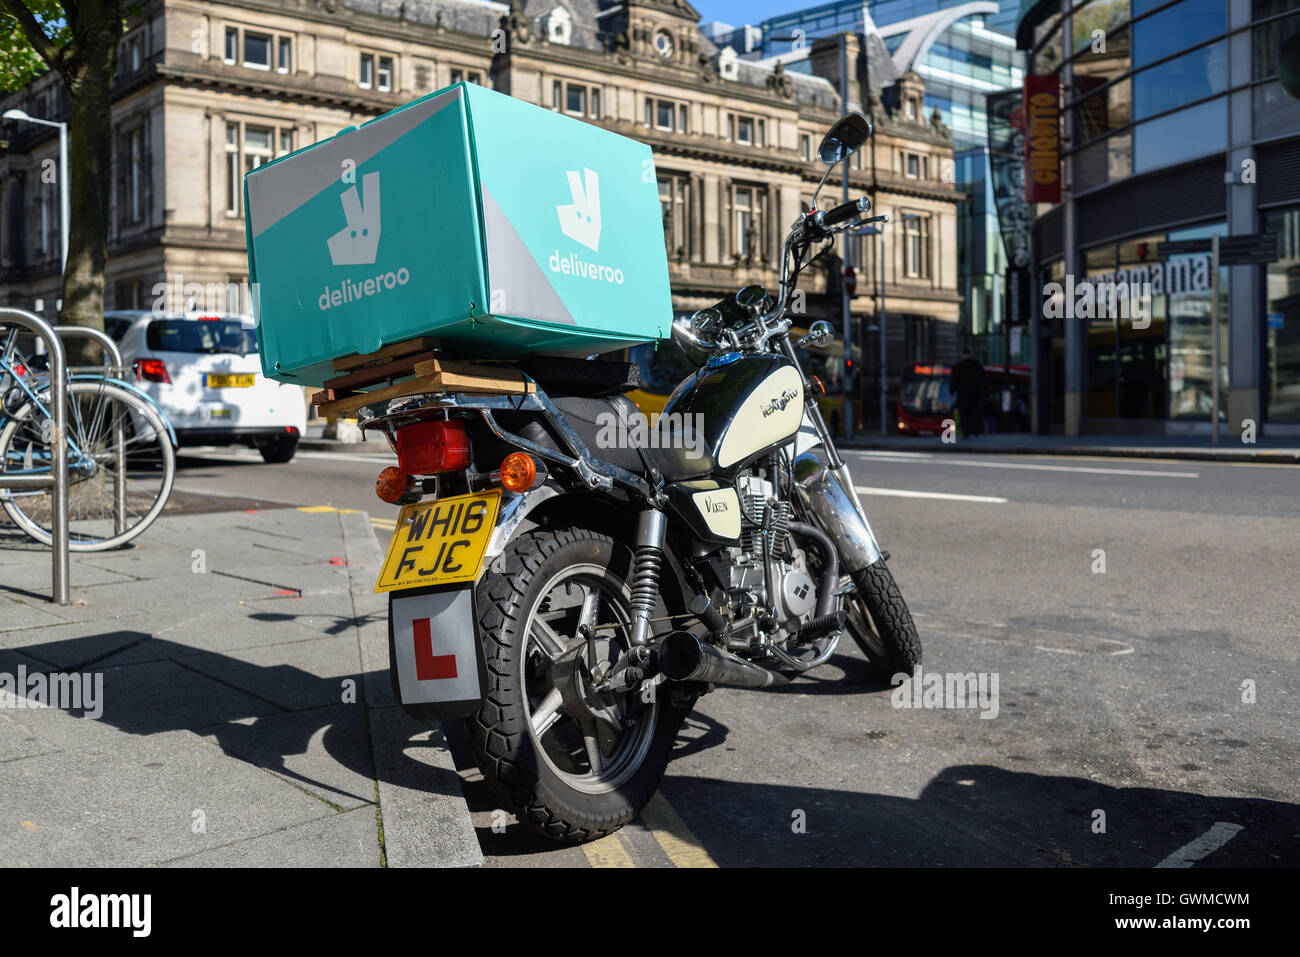 Deliveroo Food Courier Delivery Services Stock Photo - Alamy